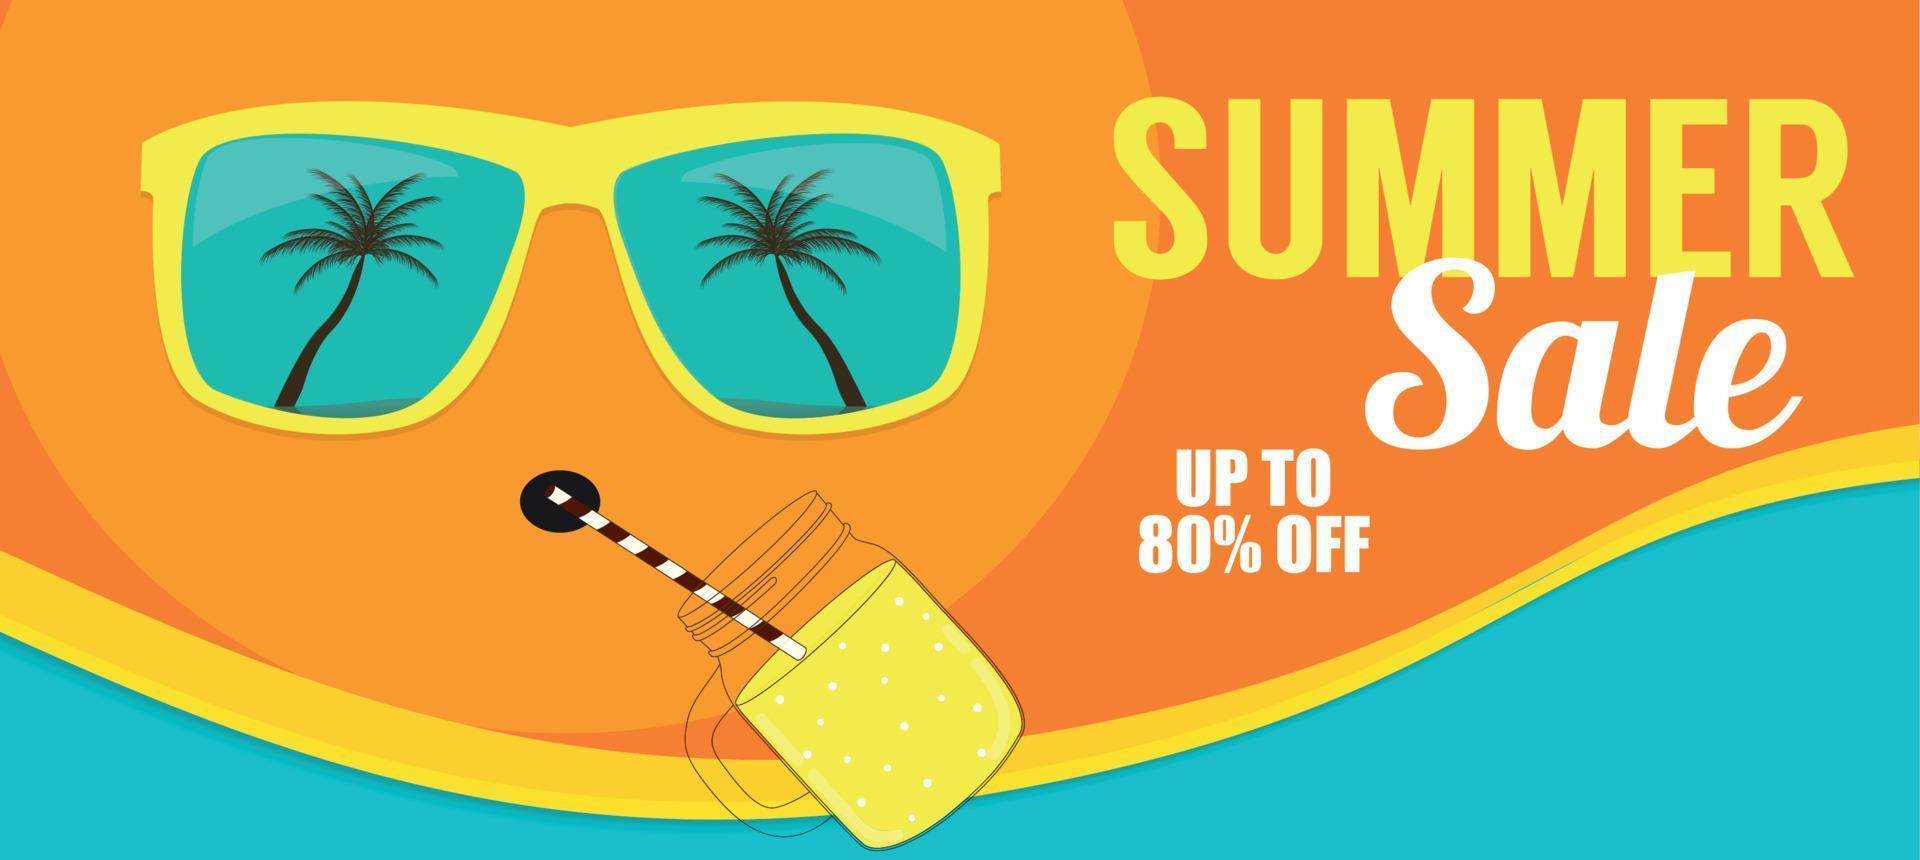 Summer Sale Banner Template for your Business. Vector Illustration